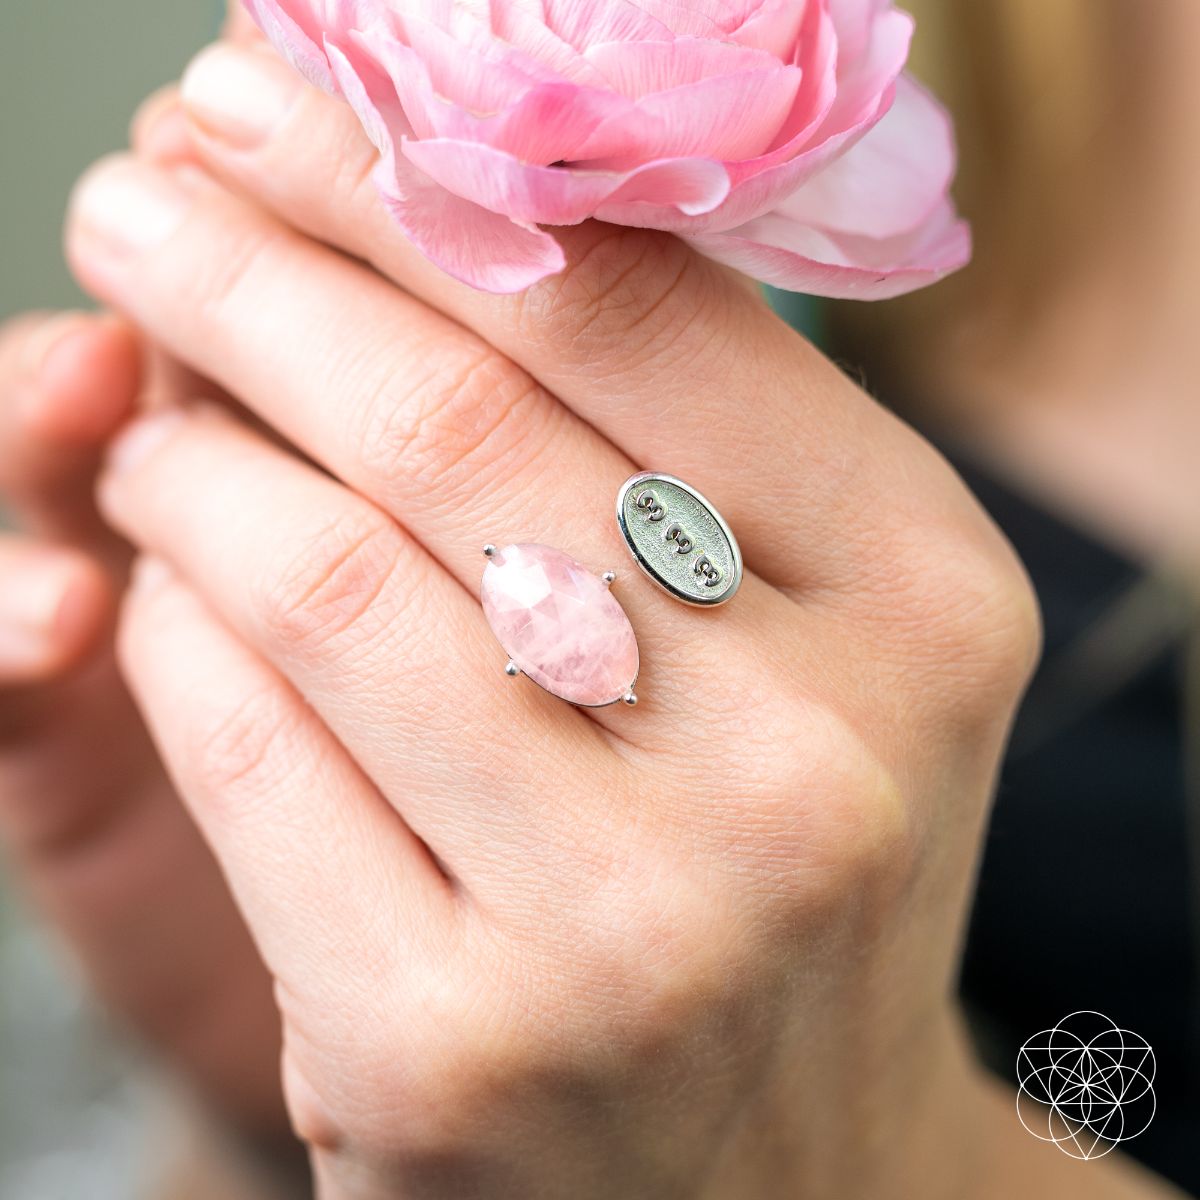 Rose Quartz Meaning and Healing Powers - The Love Stone